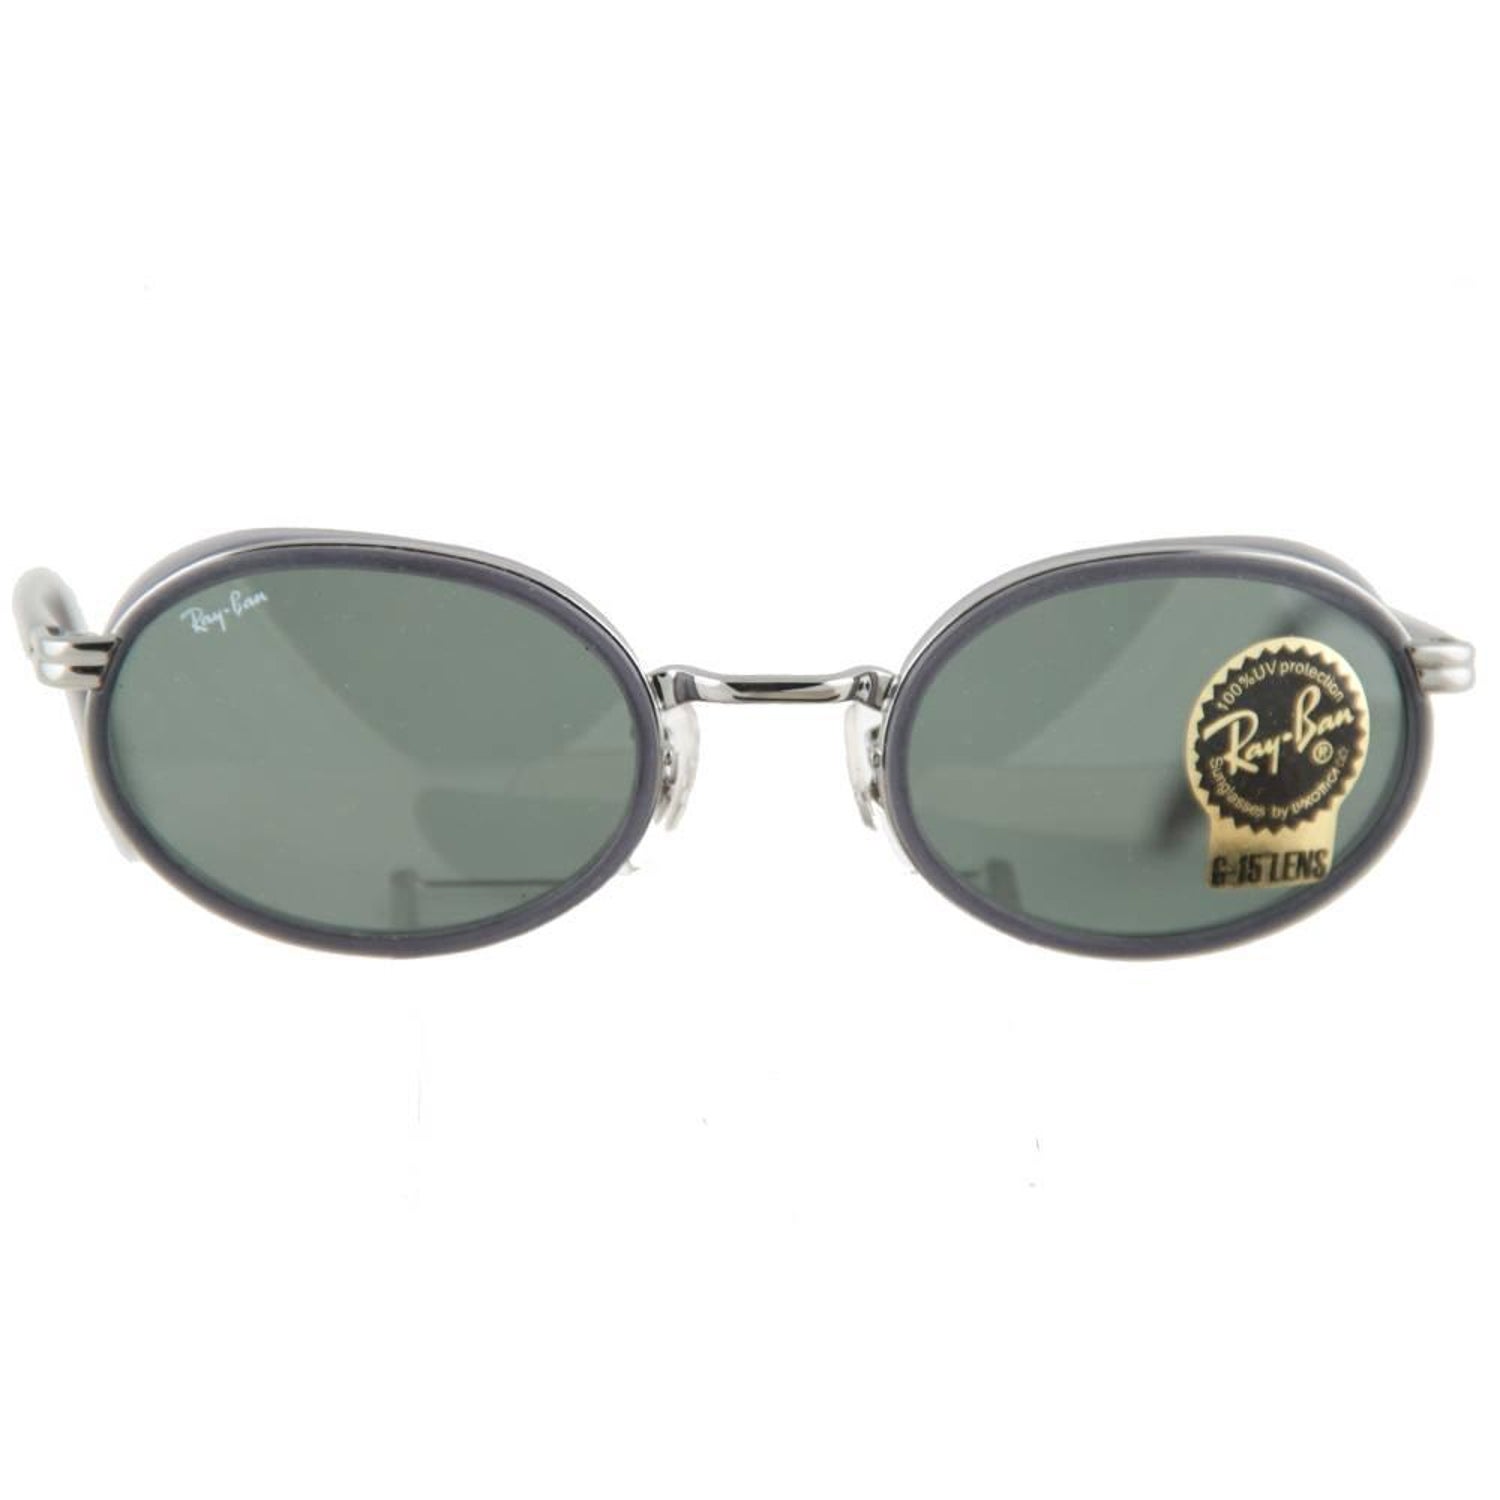 RAY-BAN B&L Vintage GRAY MINT unisex Sunglasses RB3037 W2813 50mm SIDE  SHIELDS at 1stDibs | ray ban w2813, ray-ban side shields